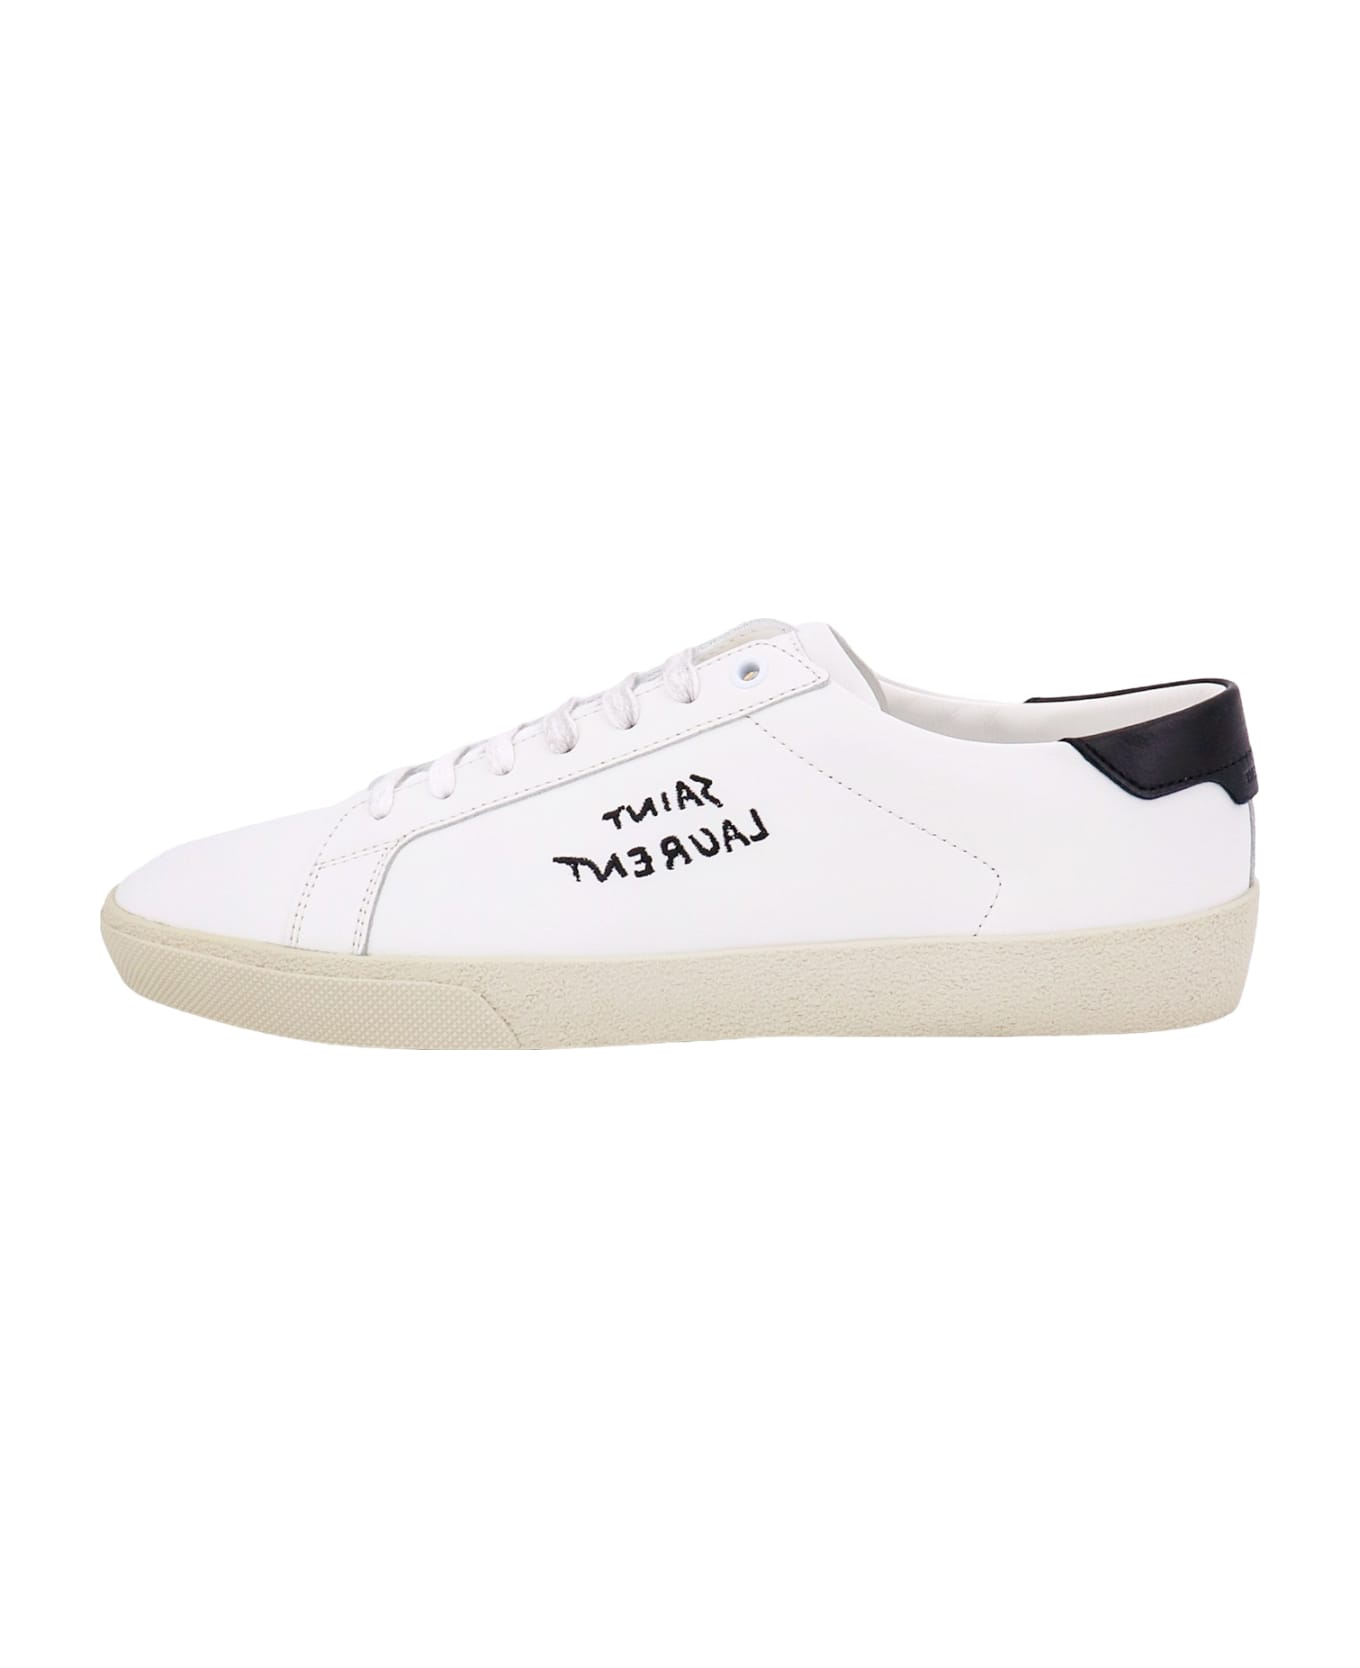 Saint Laurent Sneakers With Embroidery - White スニーカー